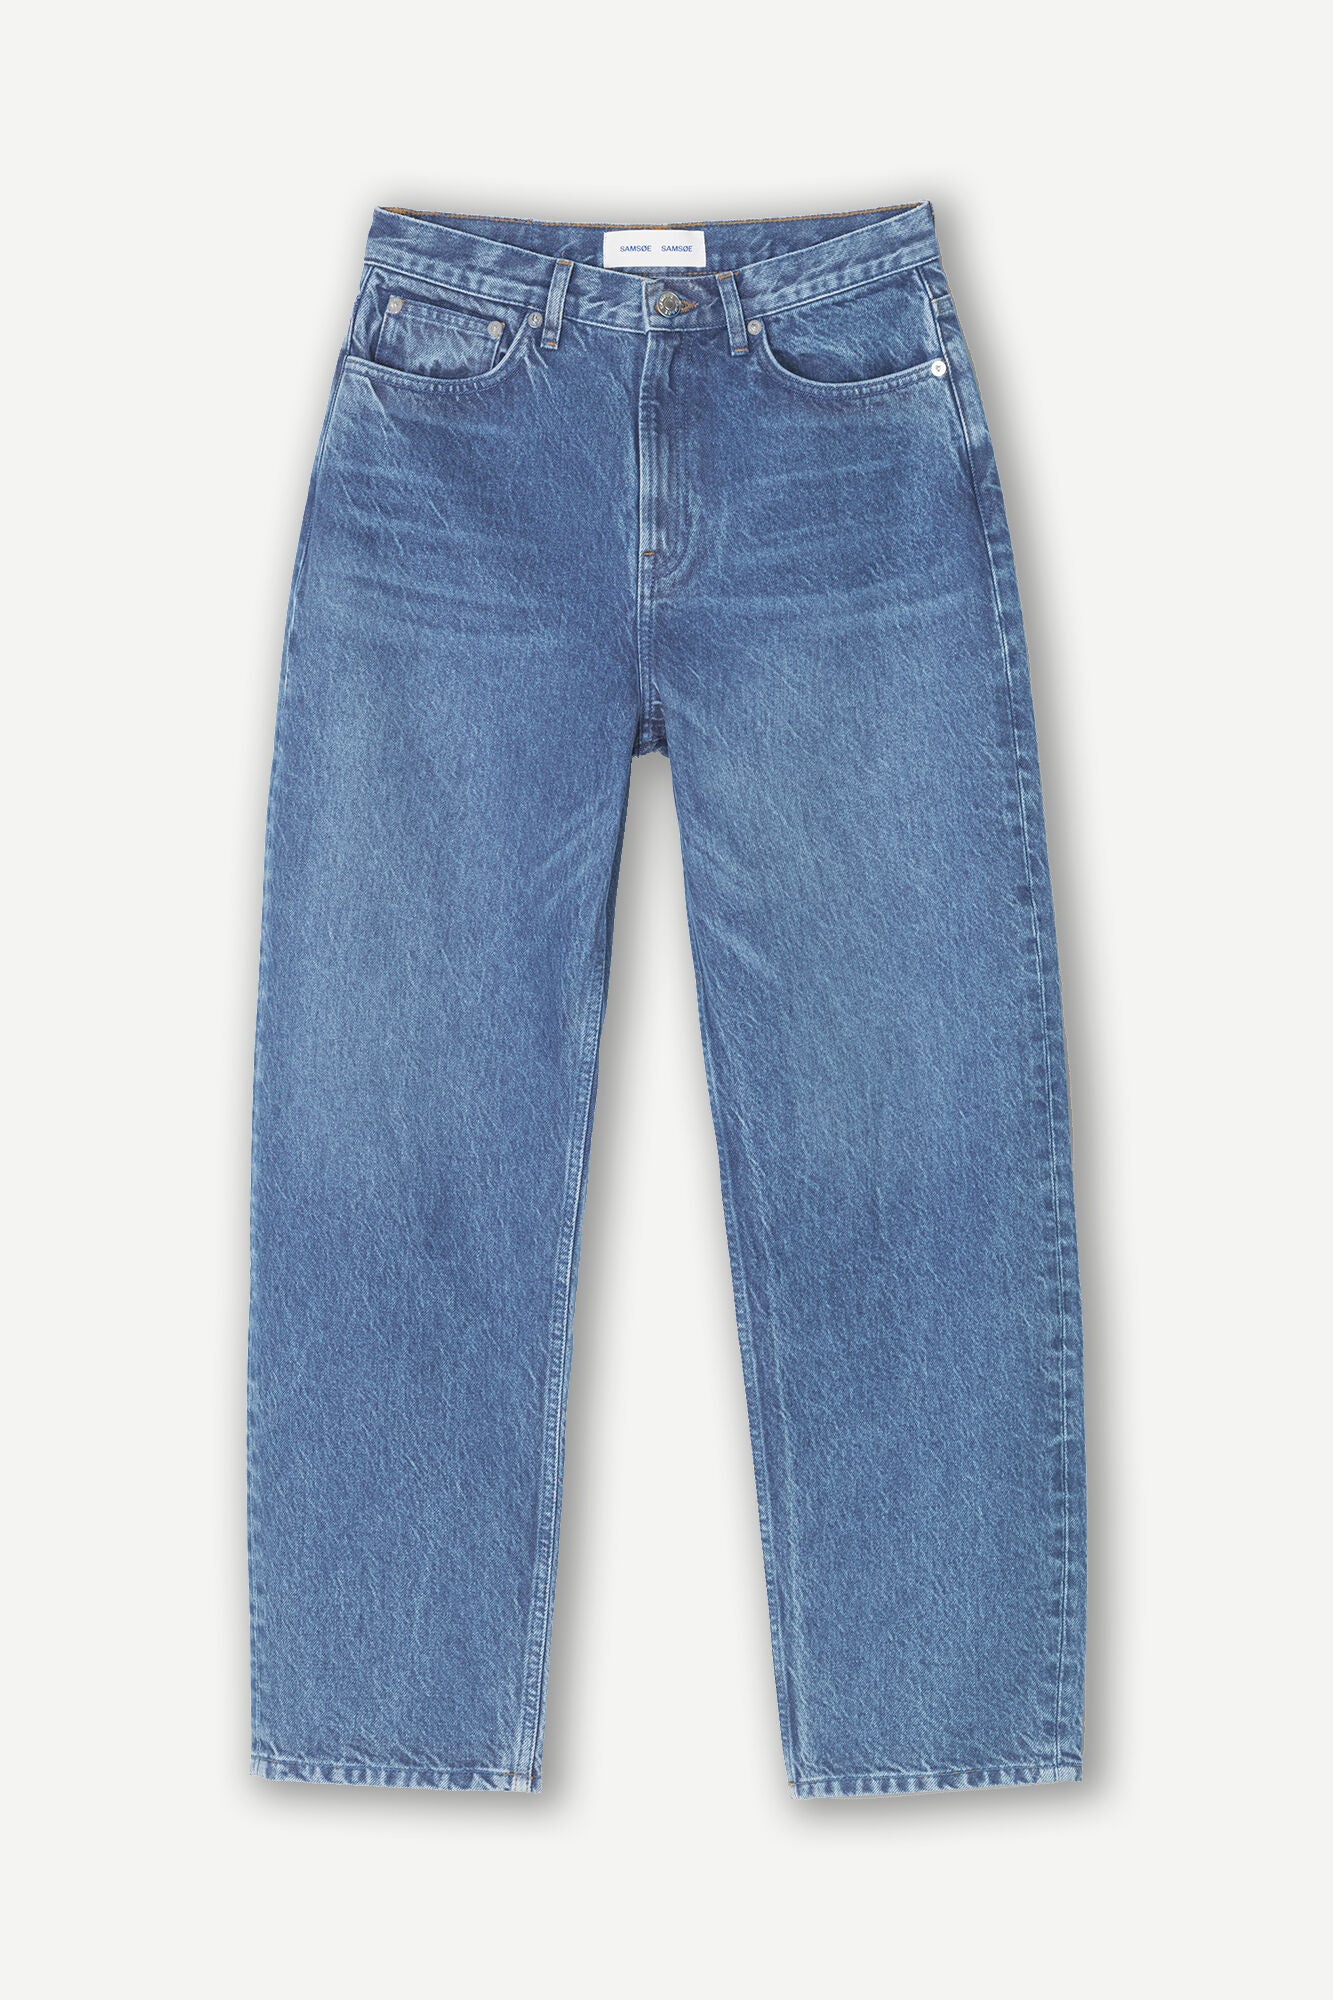 DAD JEANS IN BLUE WASH